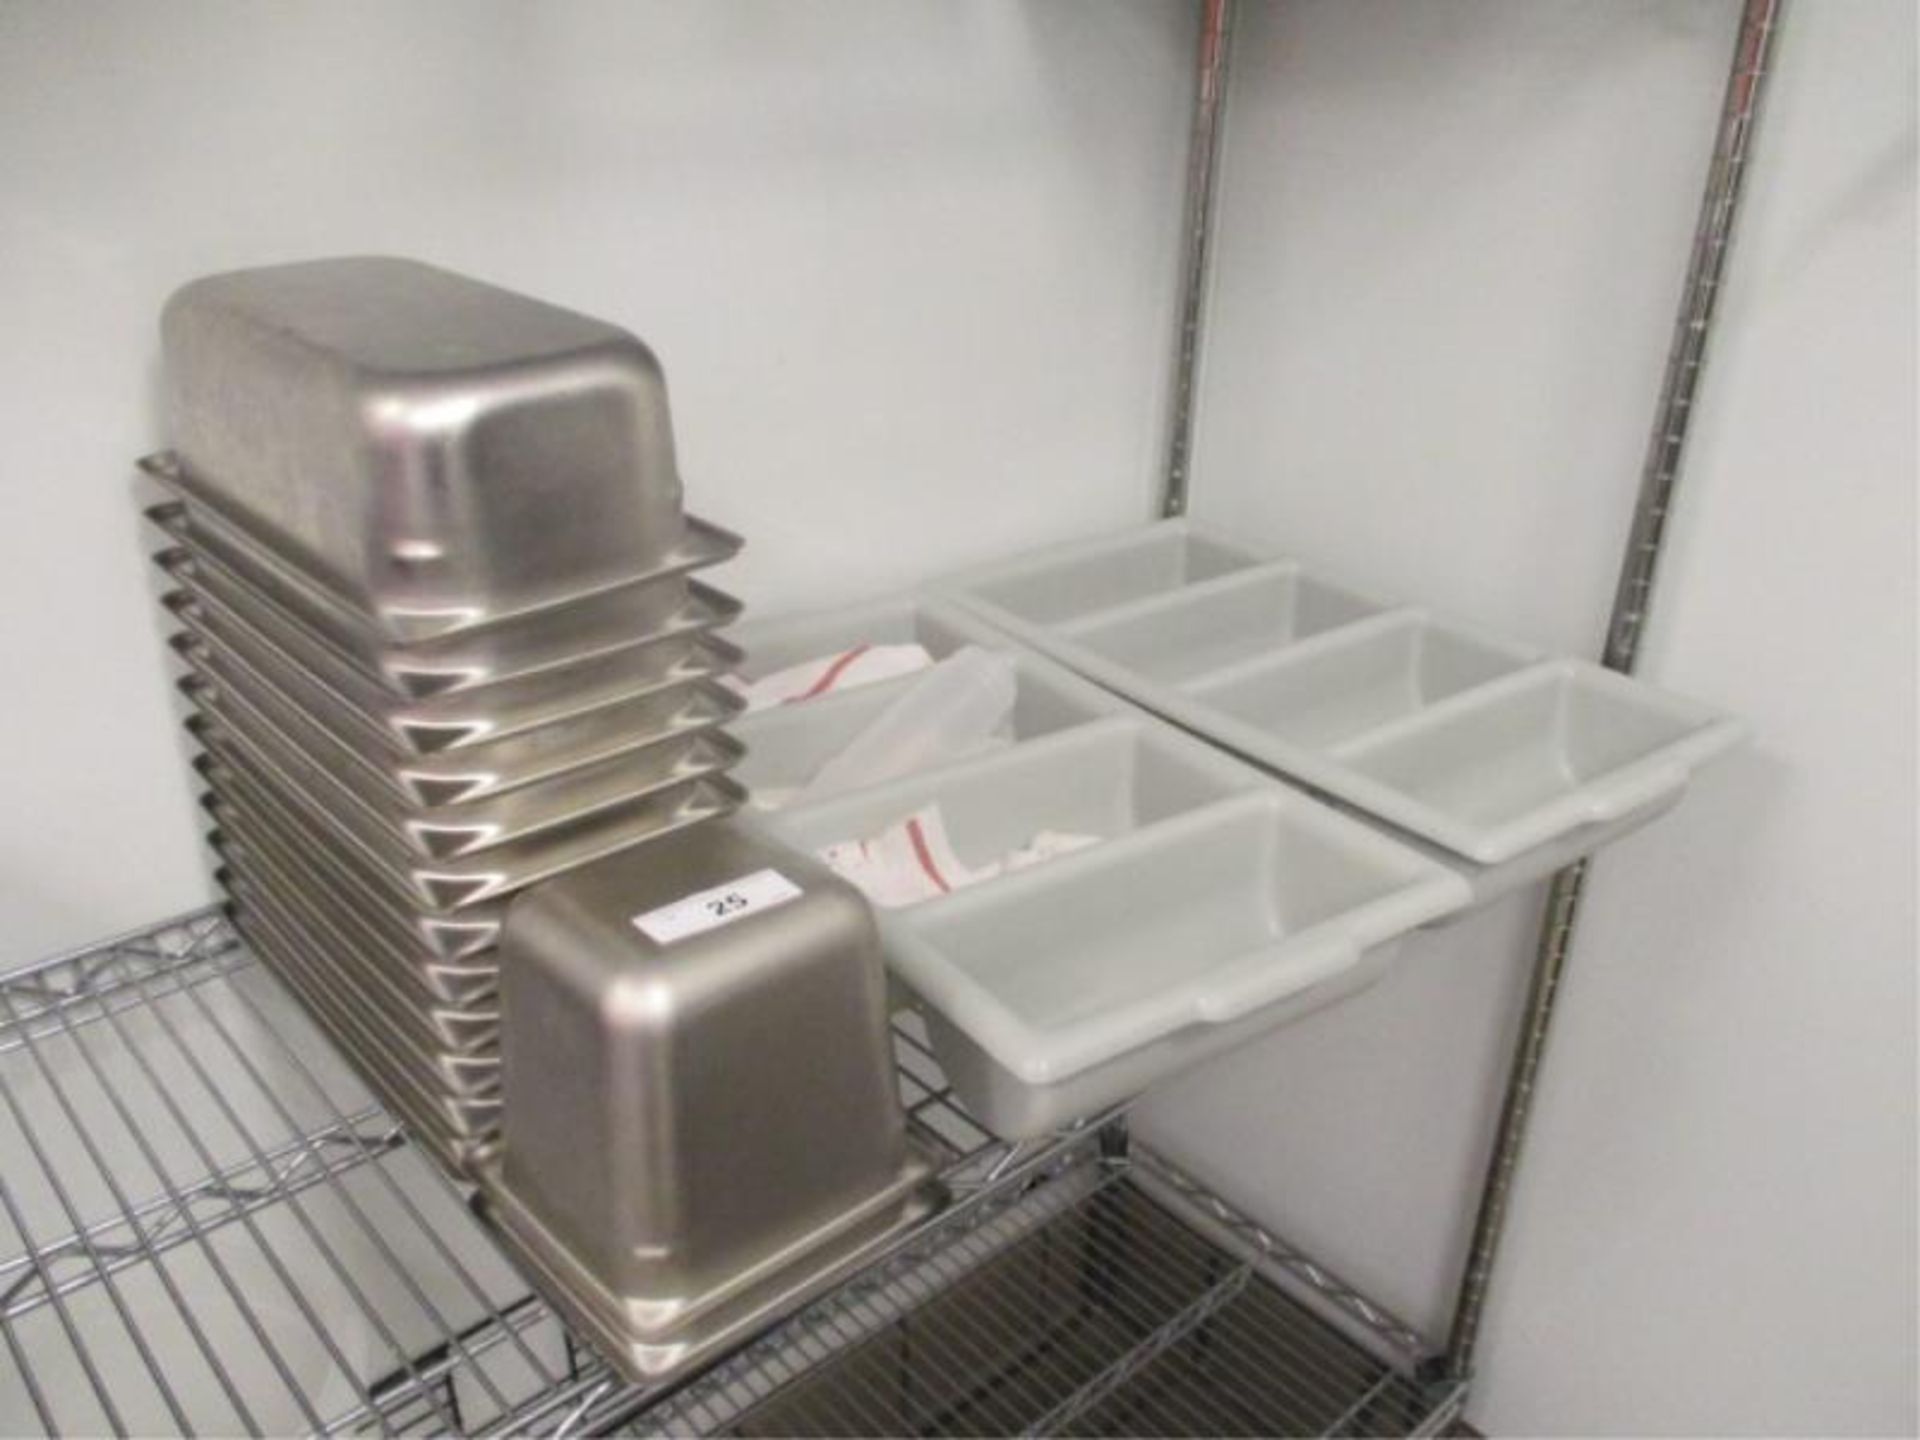 14 stainless steel inserts & 2 utencil trays